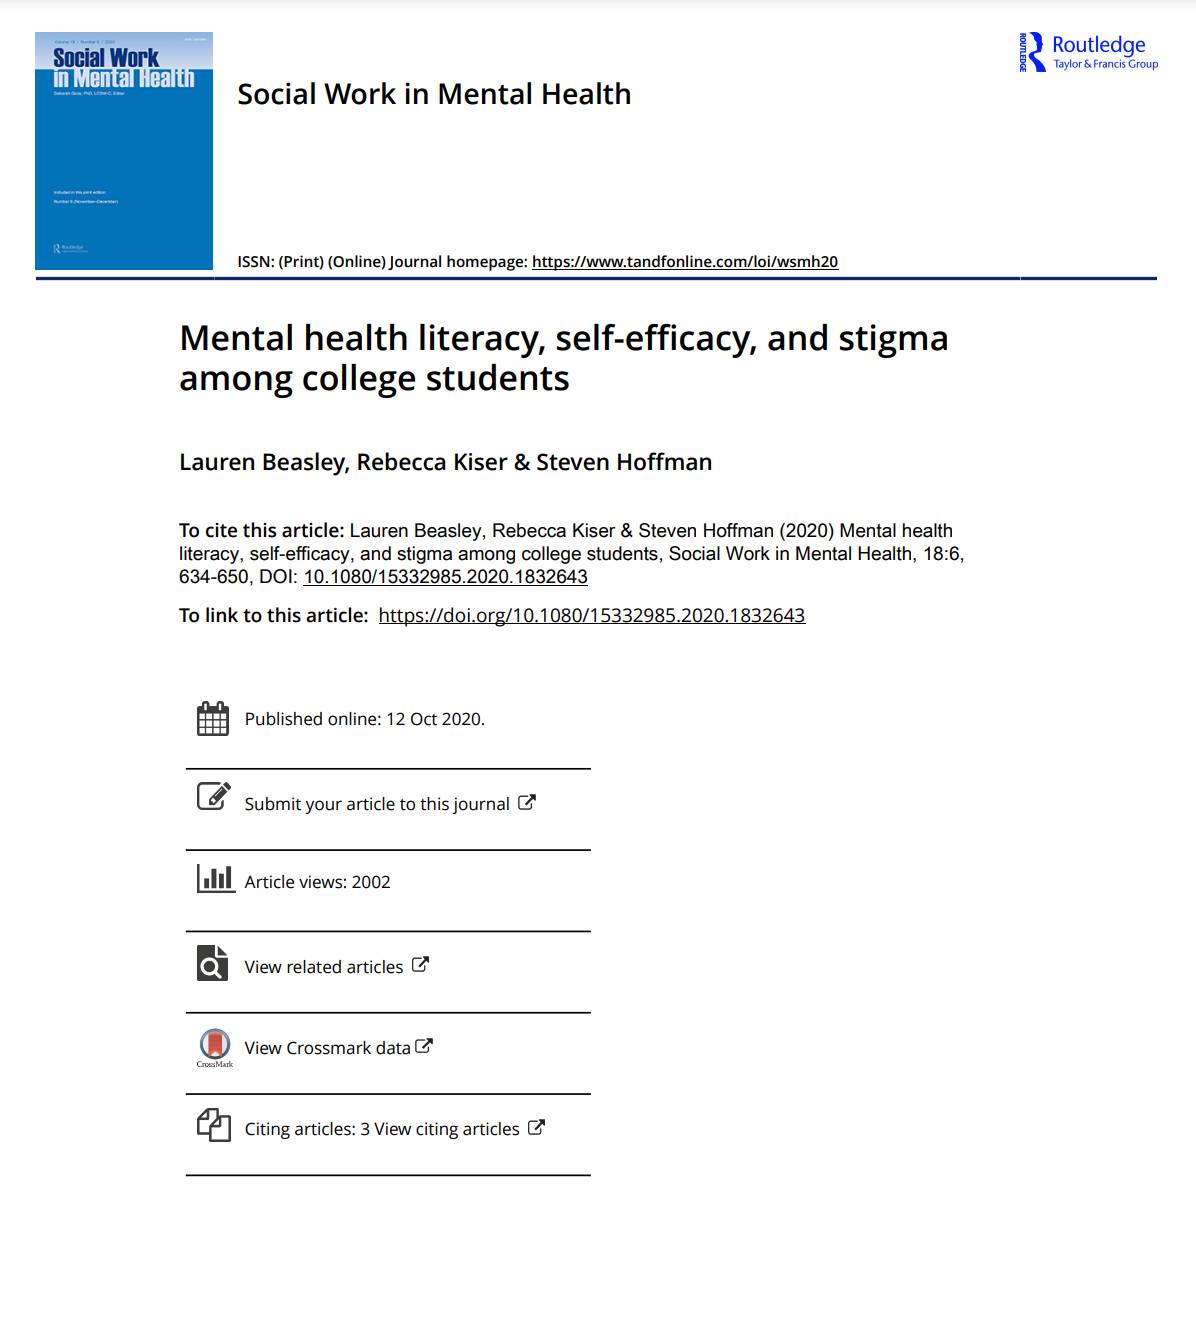 Mental Health Literacy, Self-Efficacy, and Stigma Among College Students